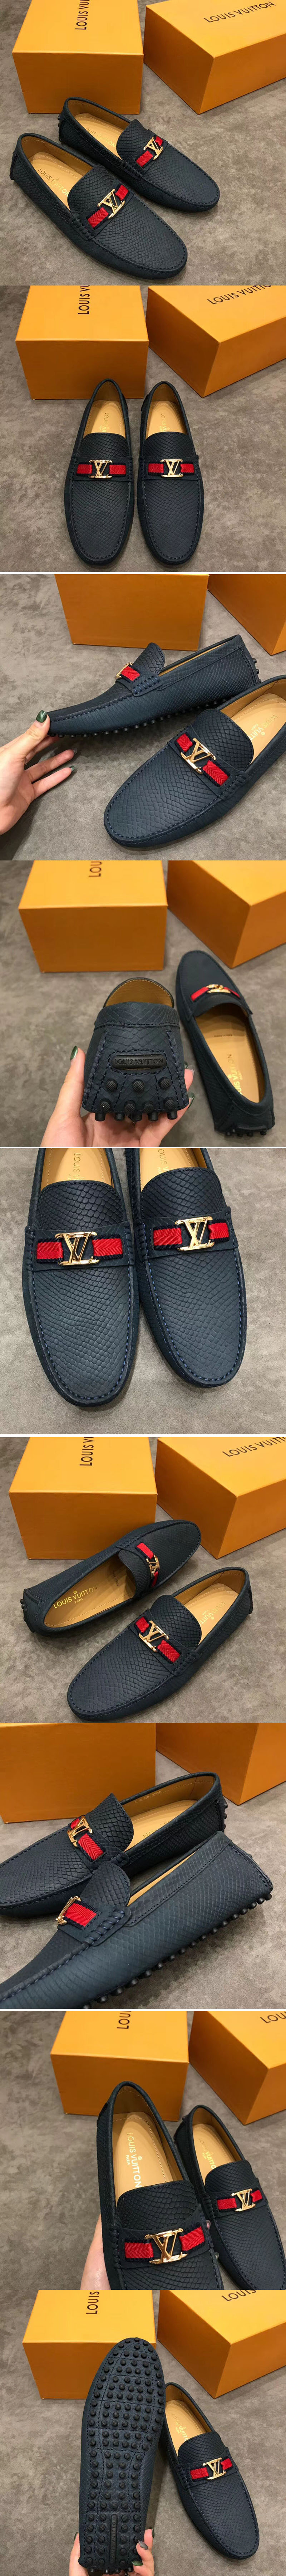 Replica Louis Vuitton LV Hockenheim Loafer And Shoes Navy Blue Calf Leather